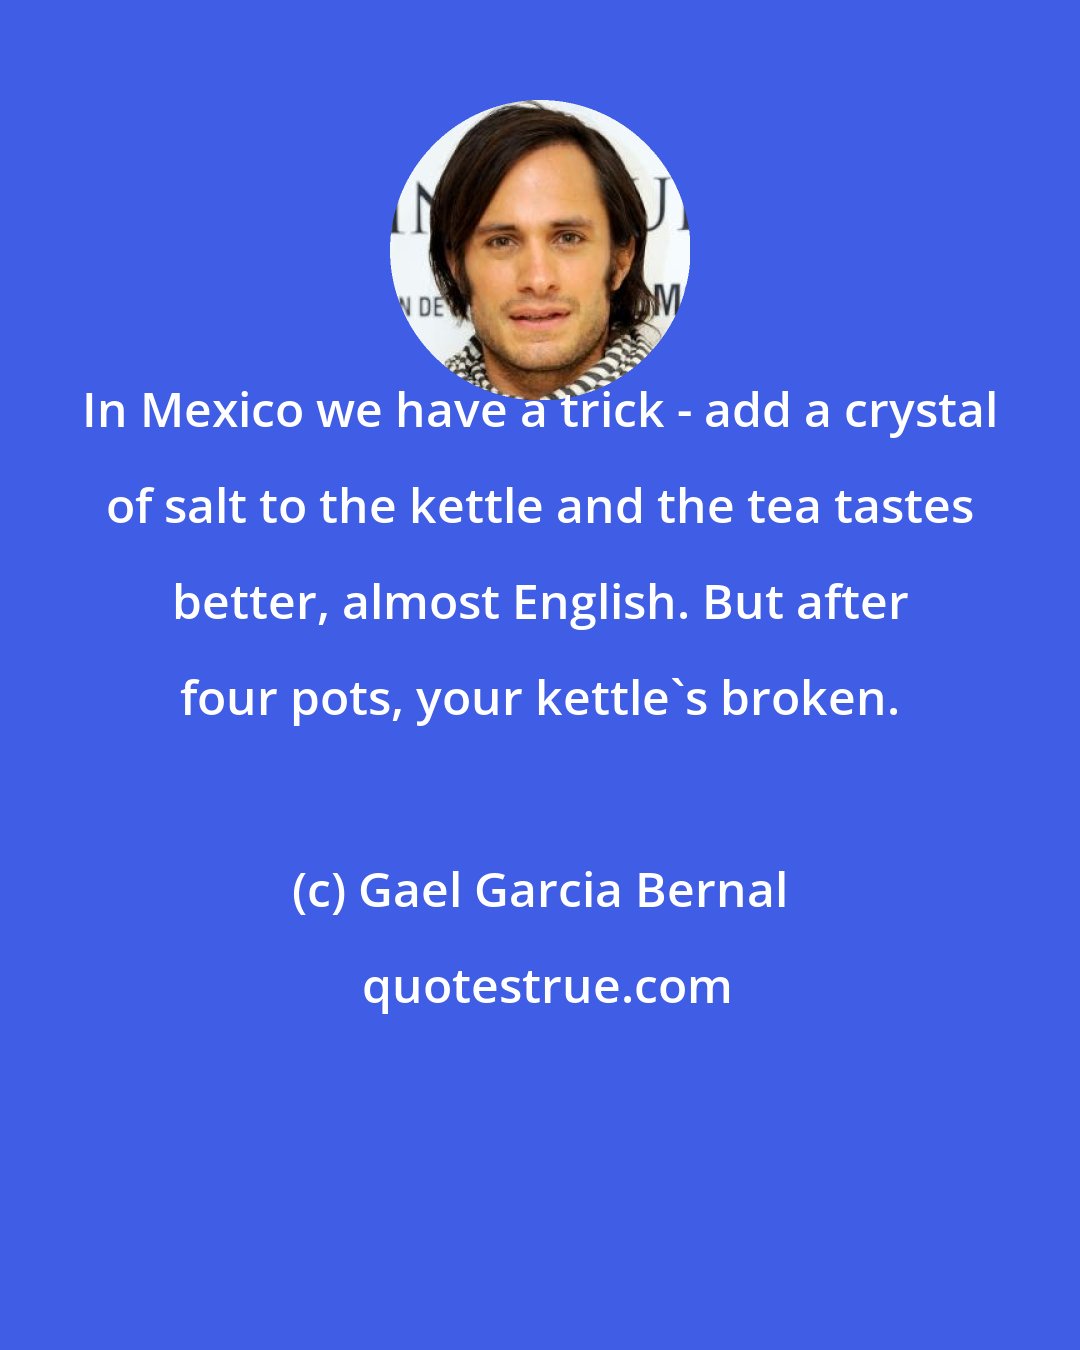 Gael Garcia Bernal: In Mexico we have a trick - add a crystal of salt to the kettle and the tea tastes better, almost English. But after four pots, your kettle's broken.